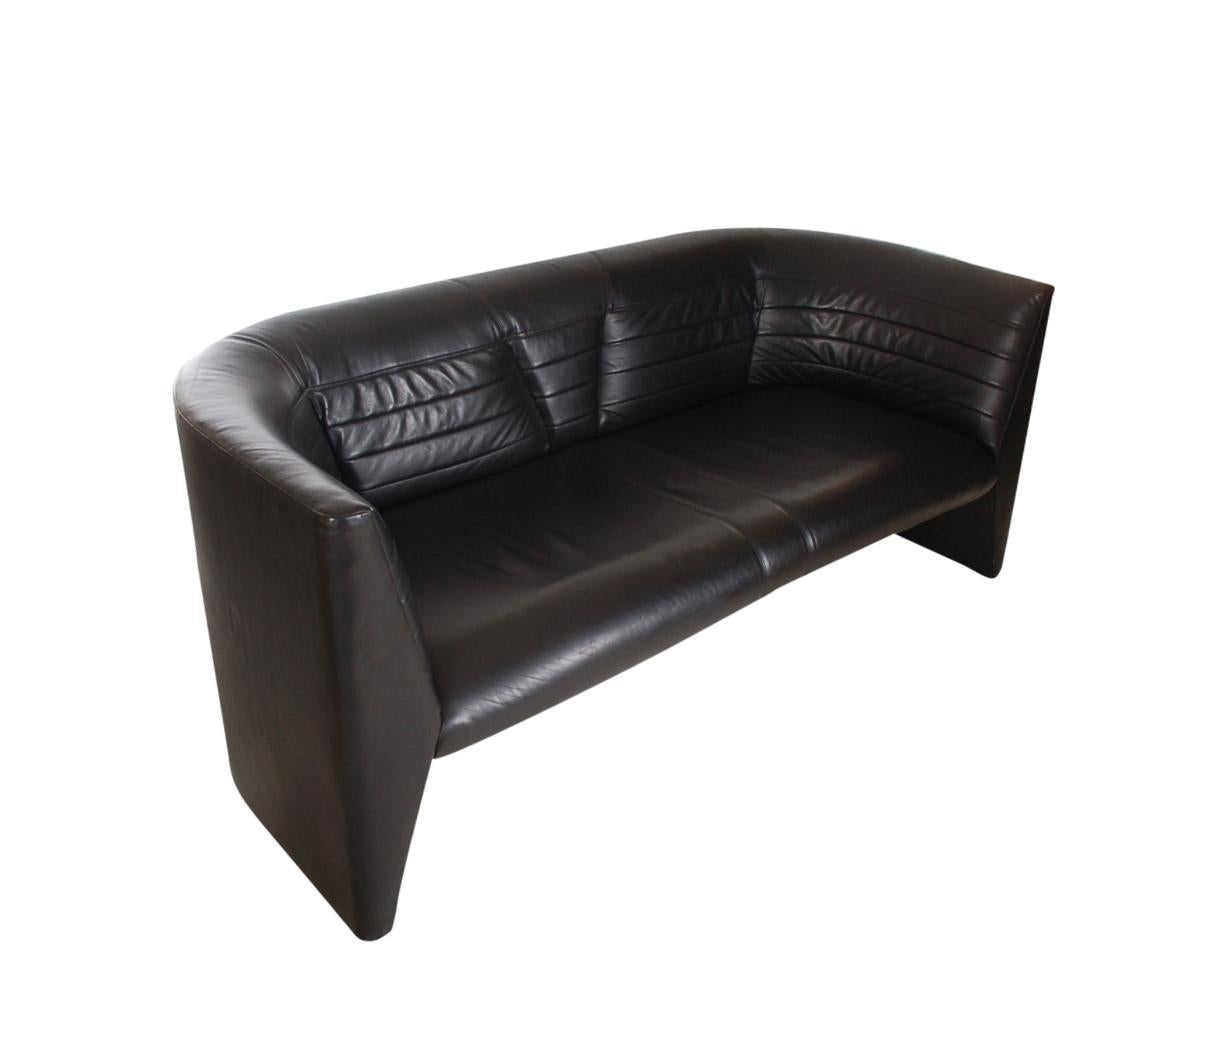 A gorgeous high quality and chic design proceed by Helikon Furniture Company in the 1990s. It features gorgeous Art Deco form and stitching in soft black leather.